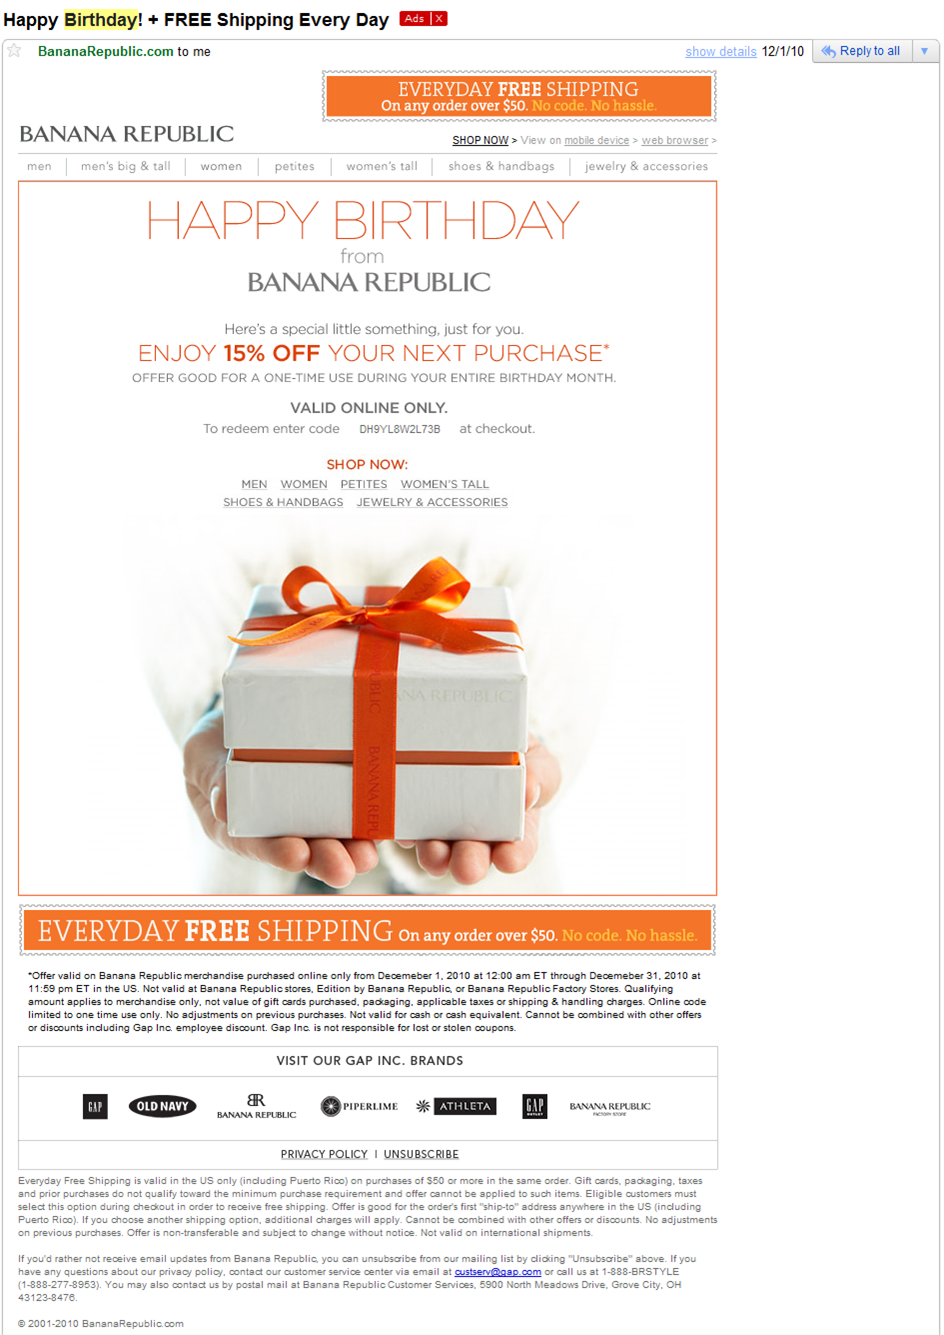 Birthday Email Marketing Campaigns